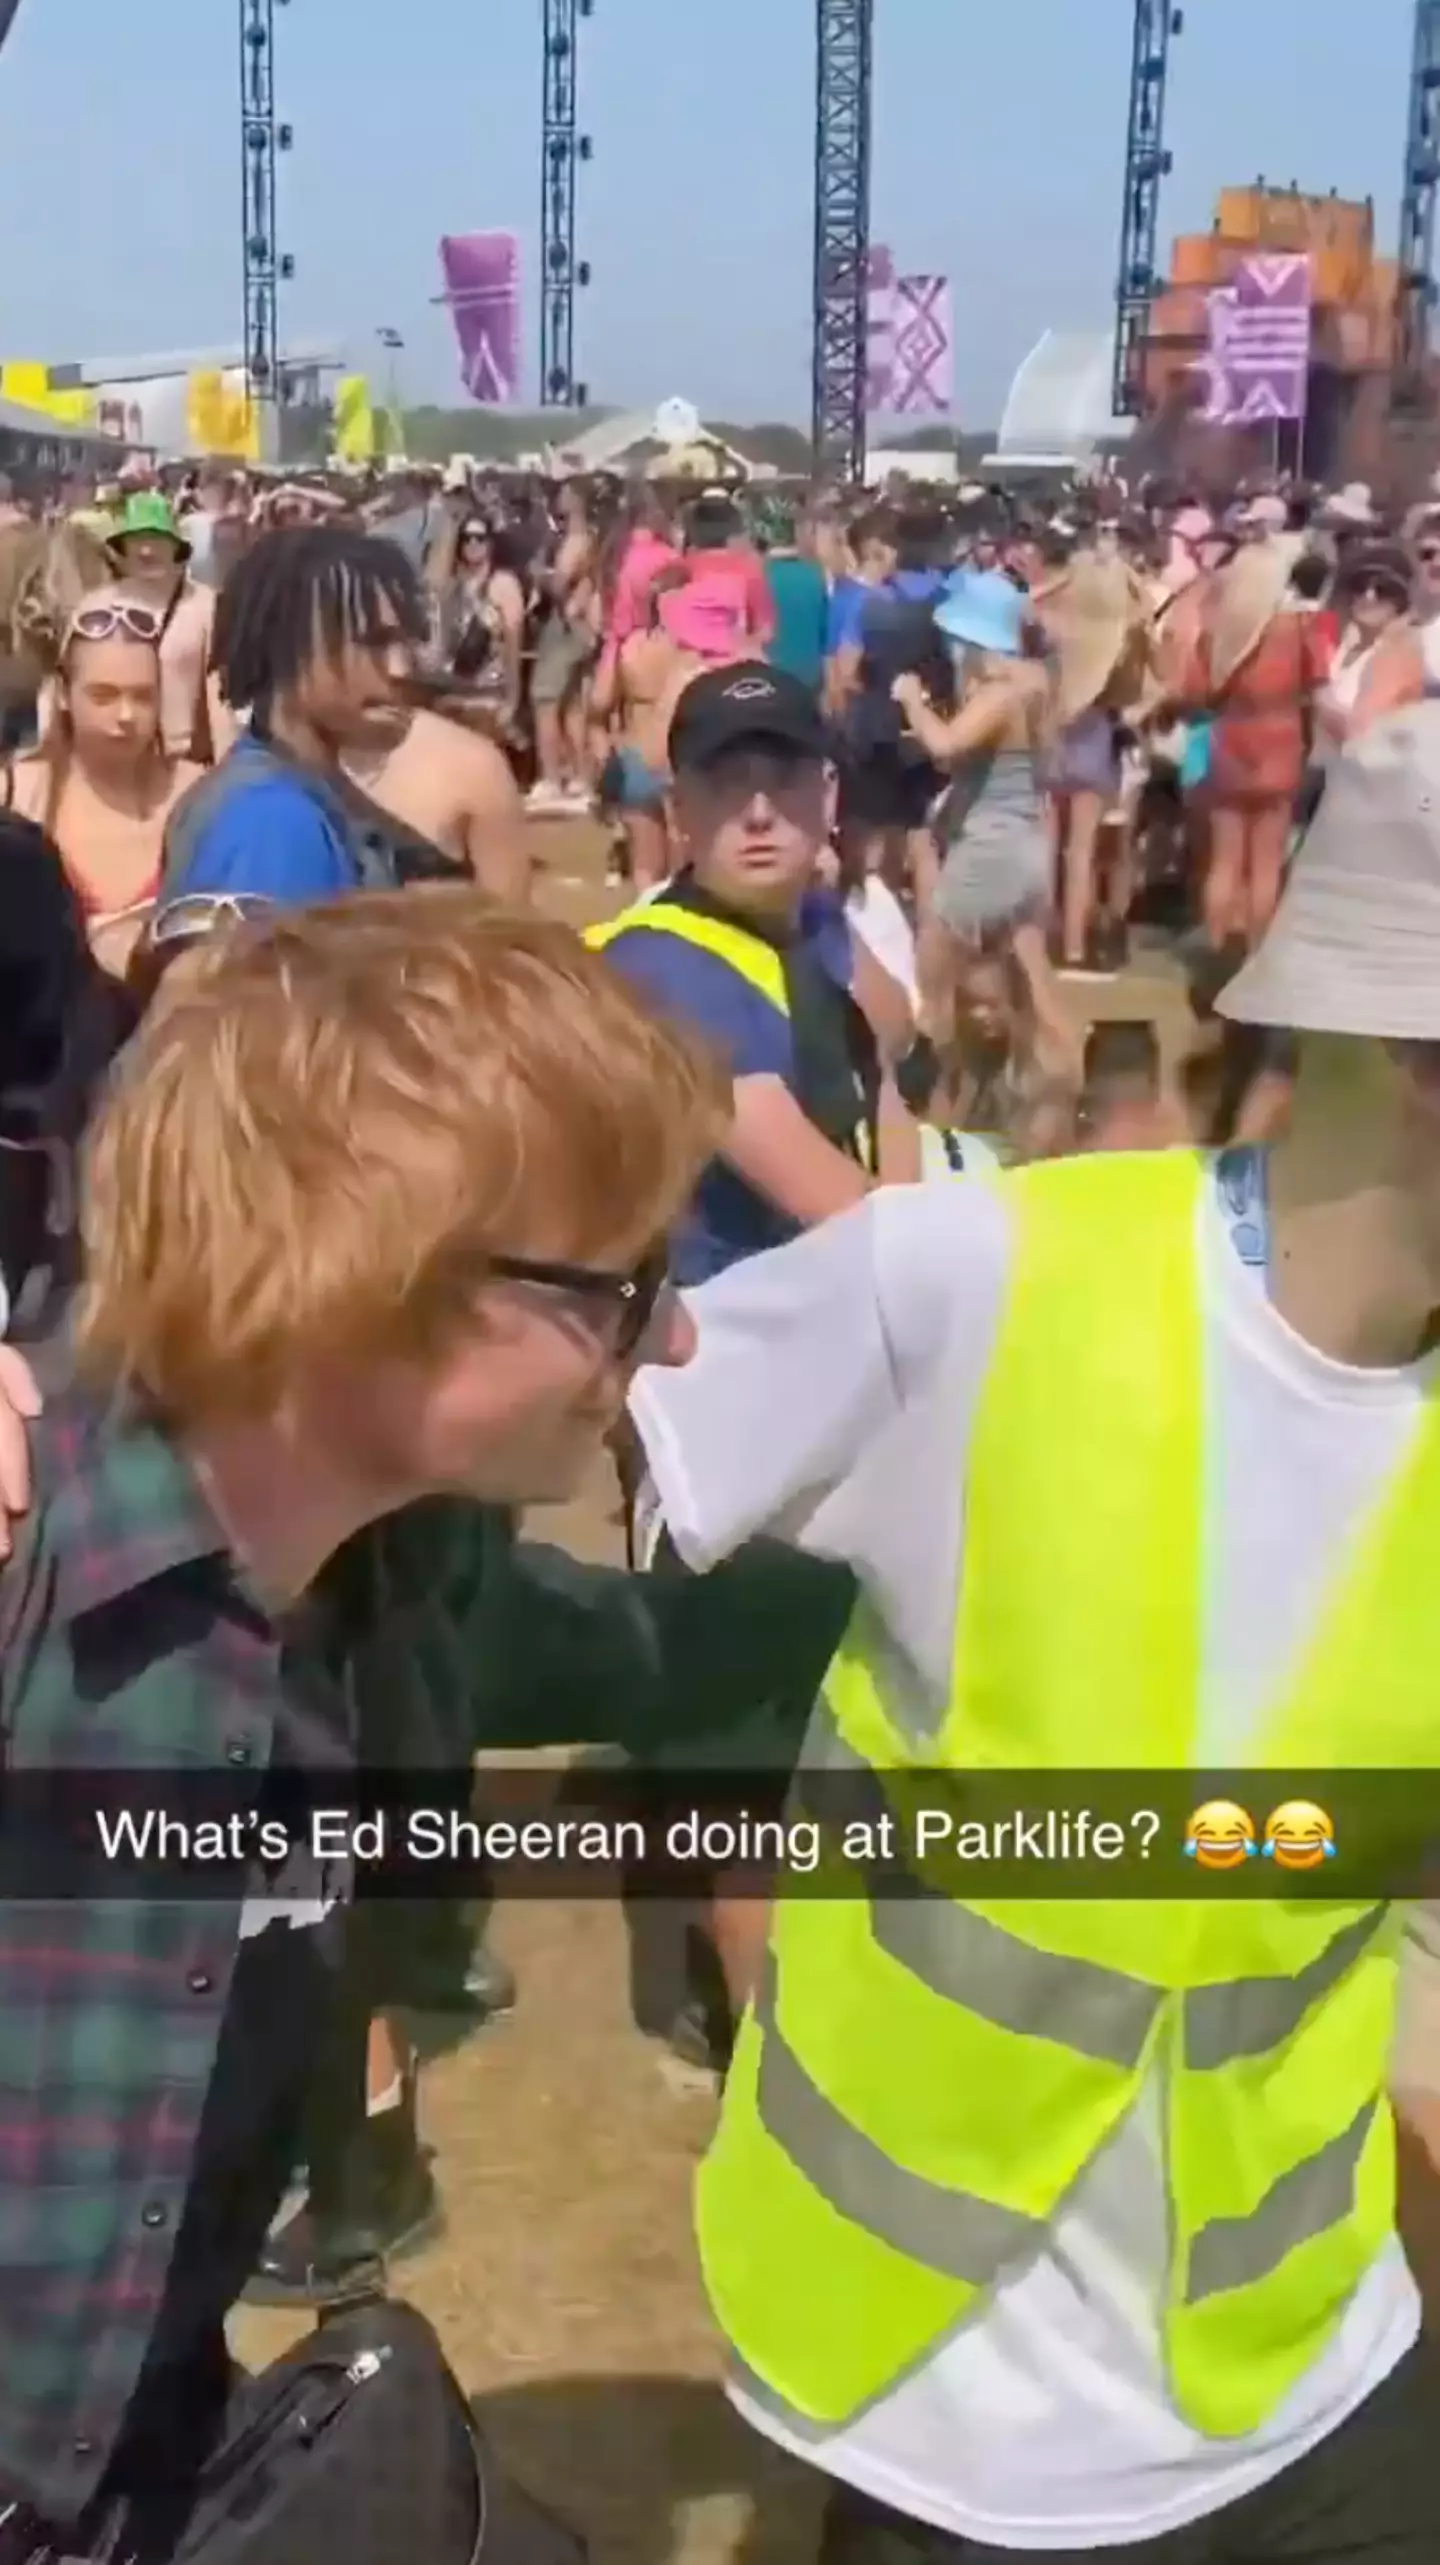 One fan can be heard repeatedly shouting Ed Sheeran's name as the man walked through the crowds.